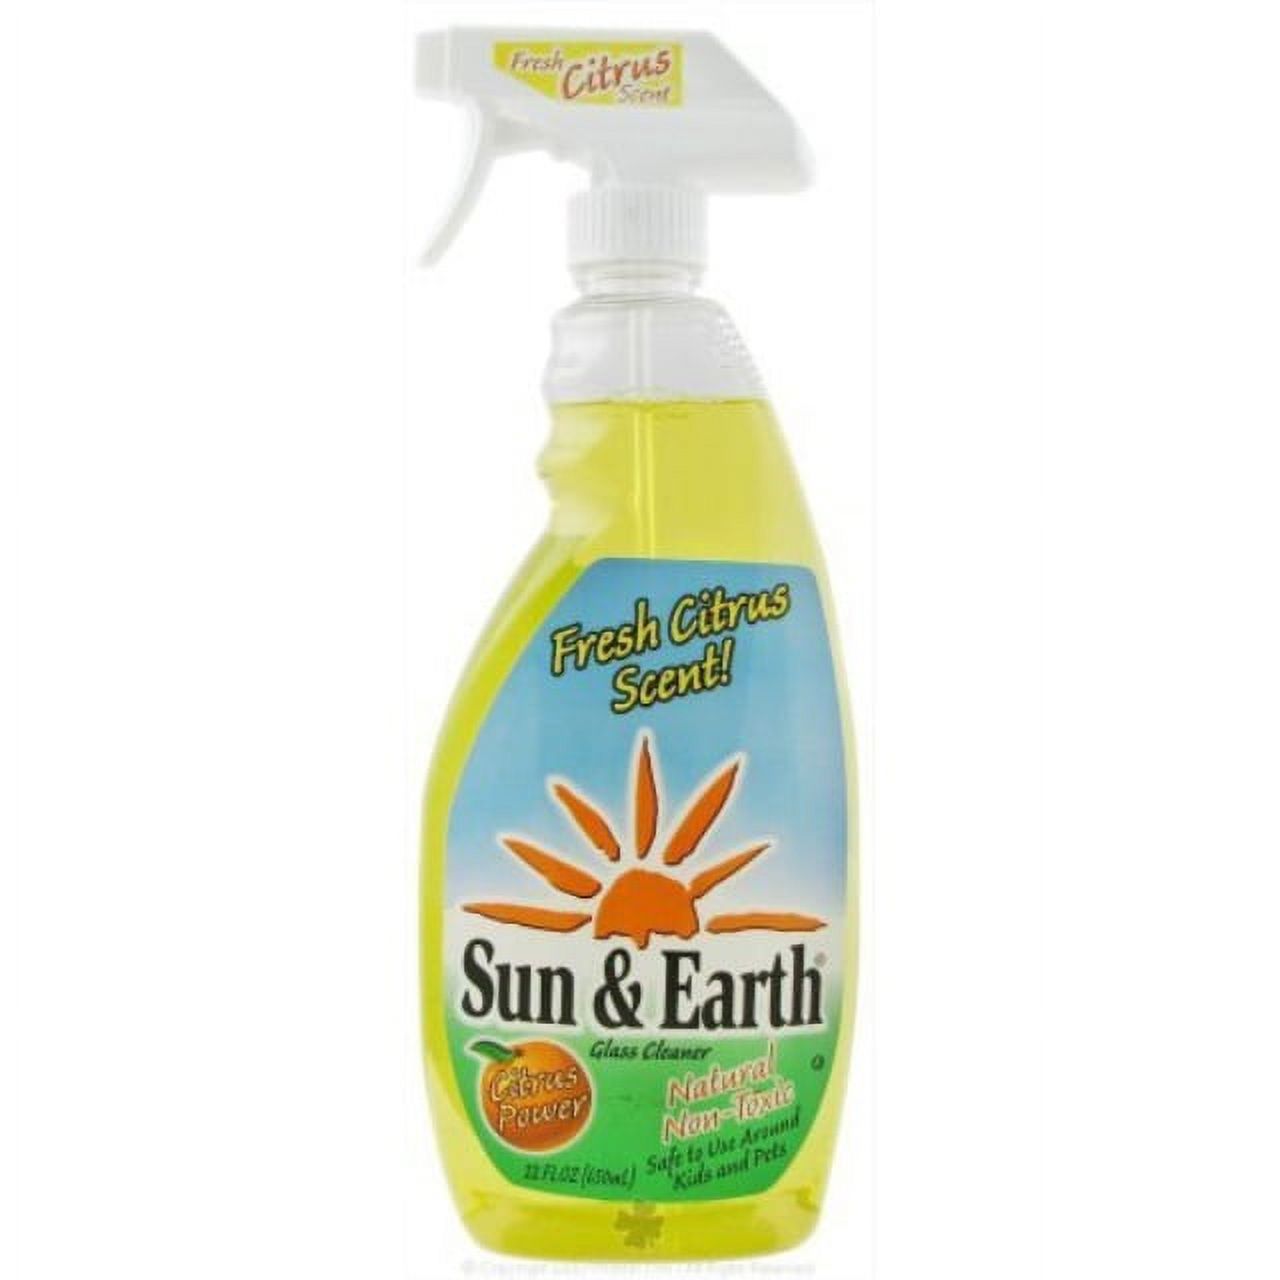 Sun & Earth Glass Cleaner, 22 oz - image 1 of 2